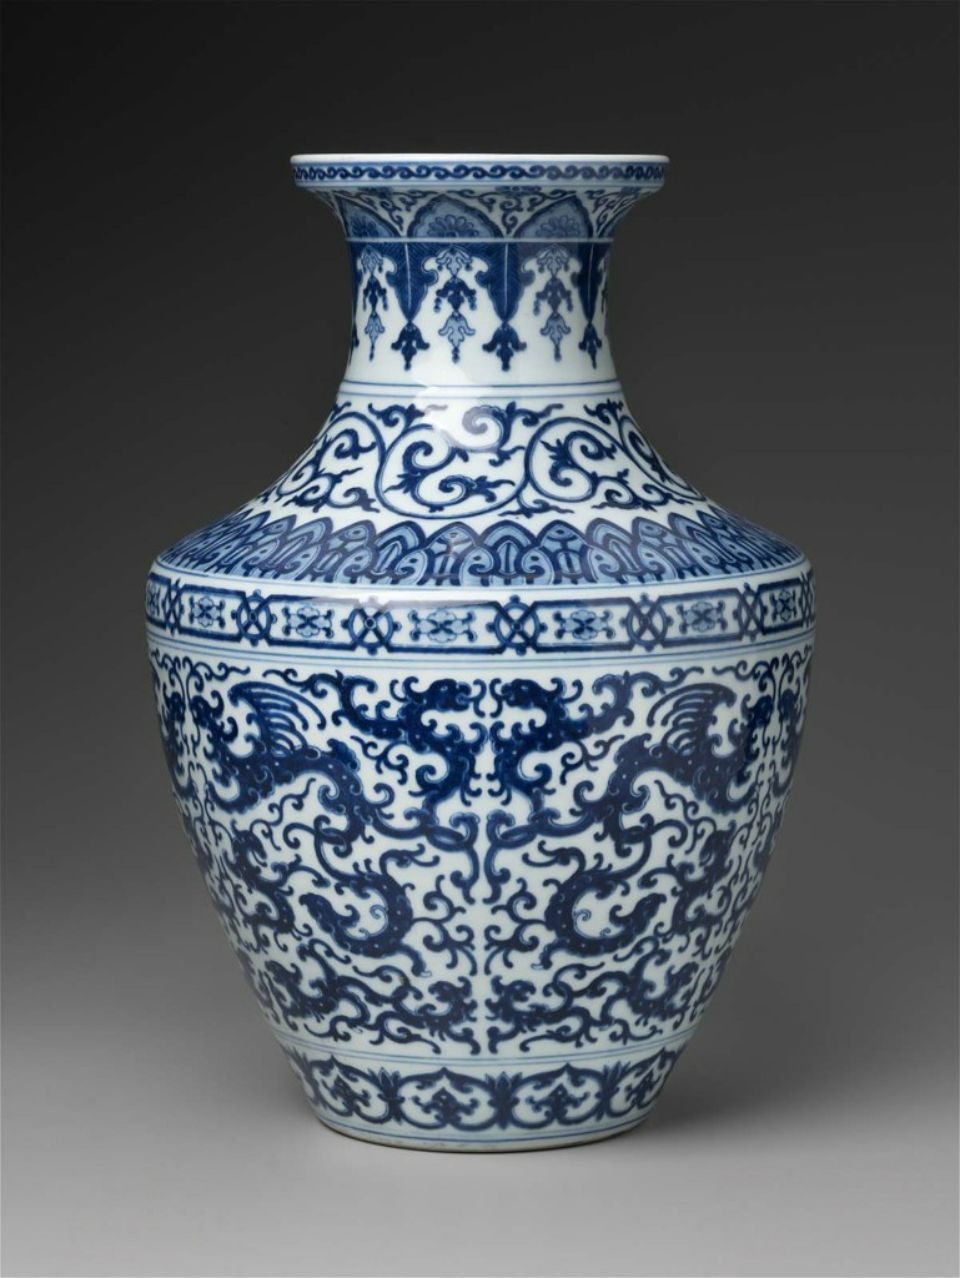 19 Stylish Tall Chinese Vases for Sale 2024 free download tall chinese vases for sale of vase with blue white phoenix winged dragons chinese qing for vase with blue white phoenix winged dragons chinese qing dynasty qianlong period 1736 95 porcelain